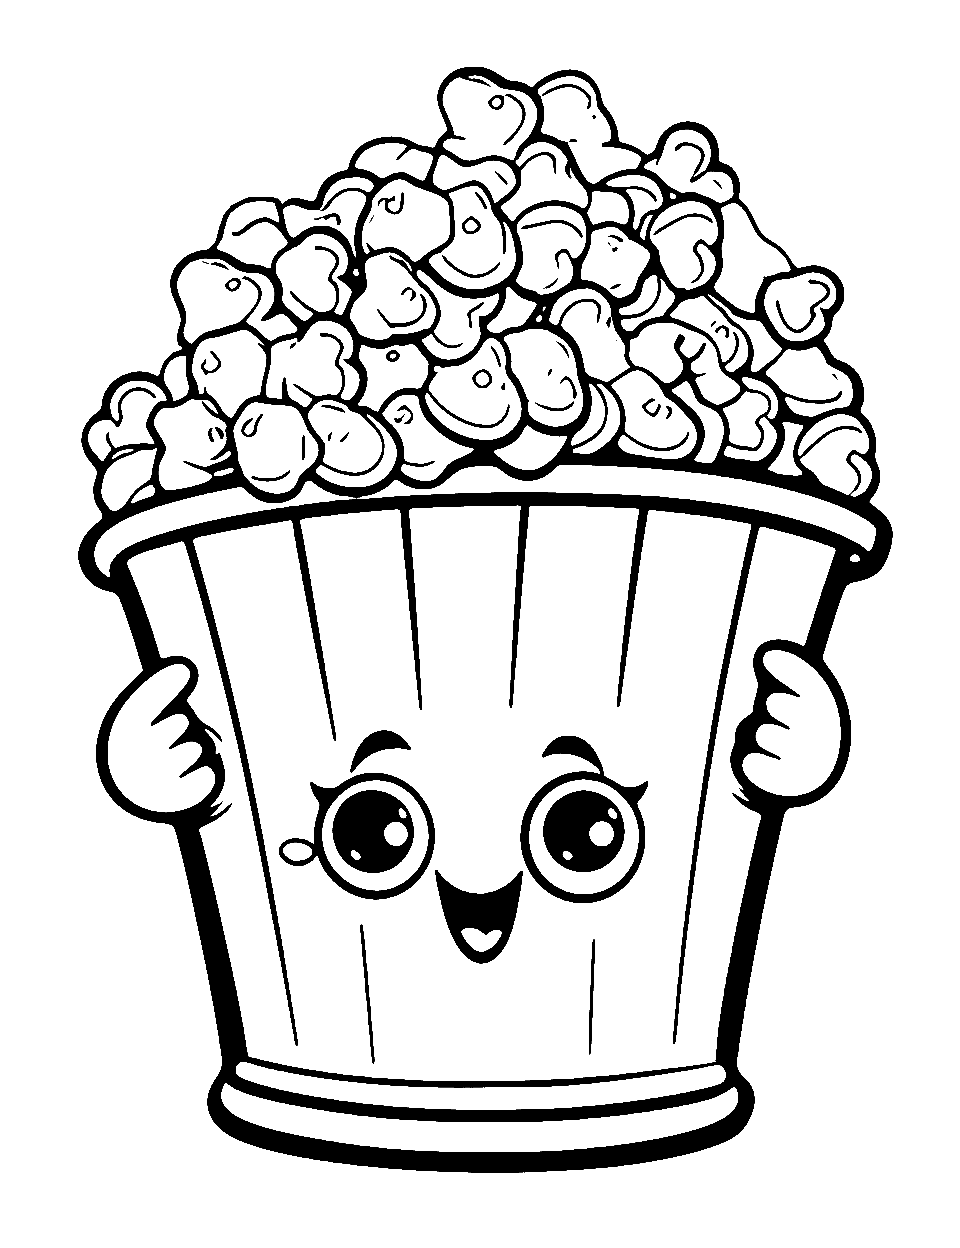 Popcorn Shopkin Coloring Page - A tub of popcorn Shopkin with a smiley face.